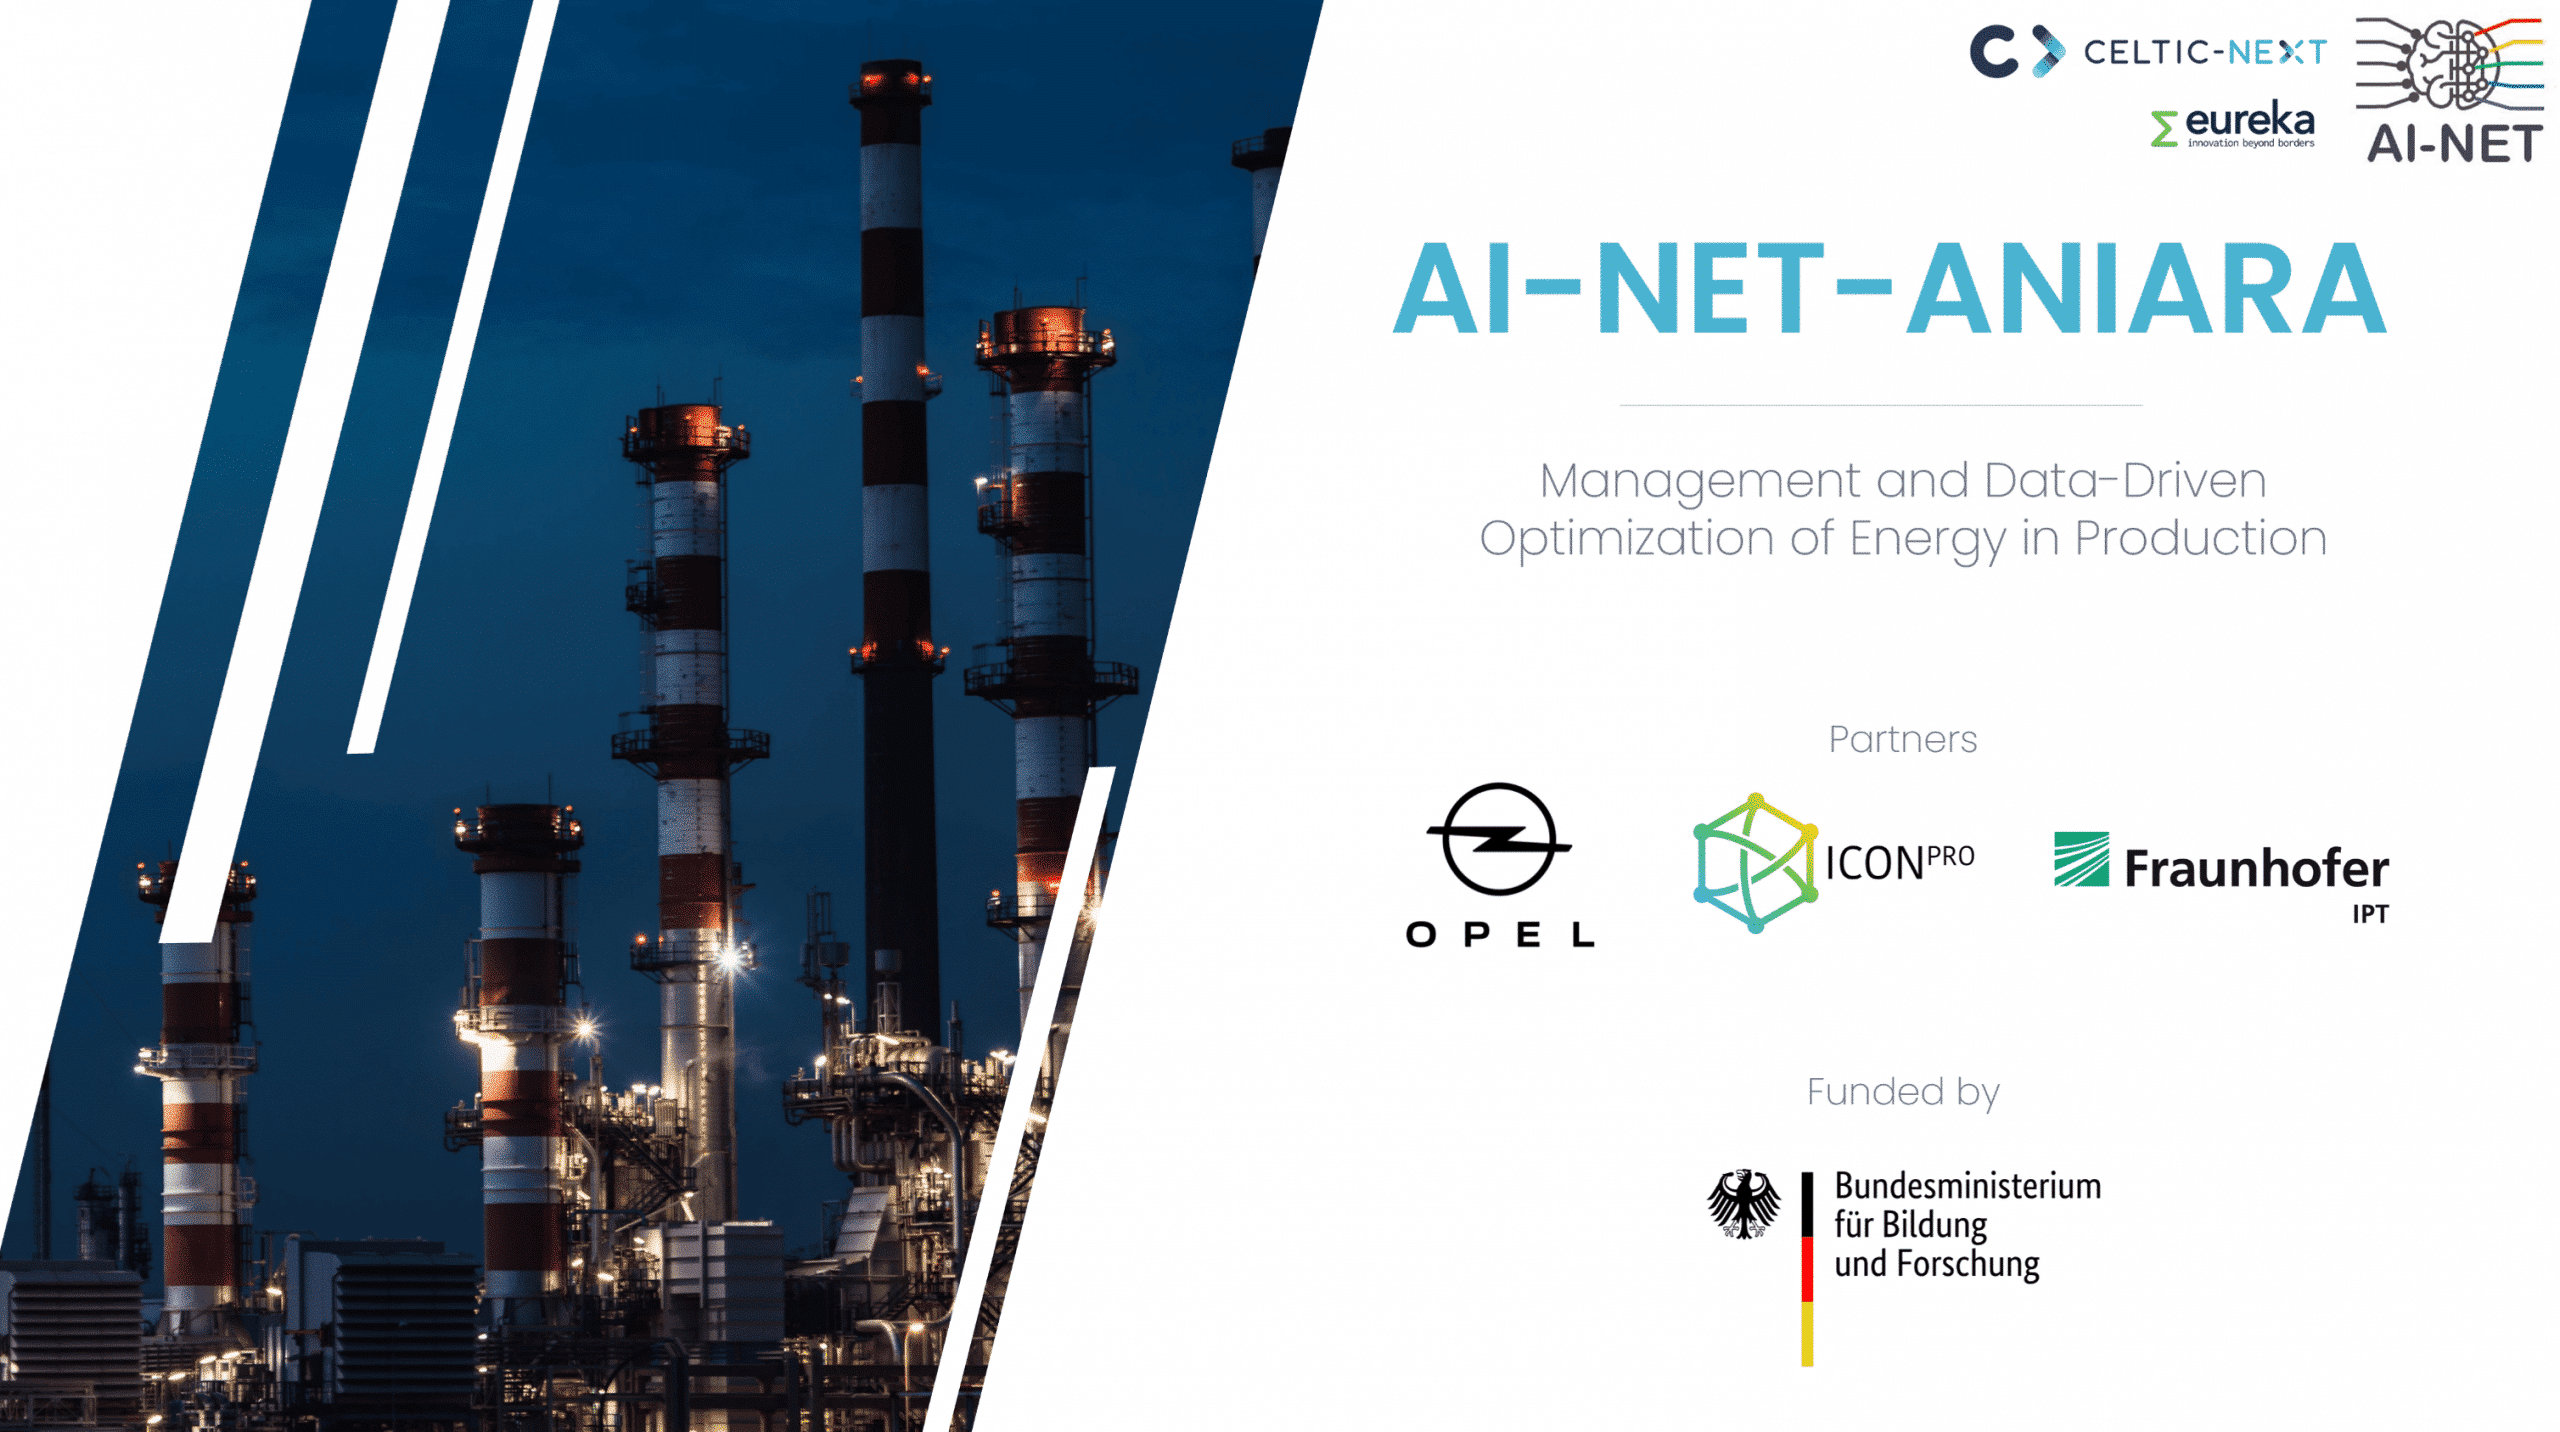 AI-NET-ANIARA Project – Management and Data-Driven Optimization of Energy in Production